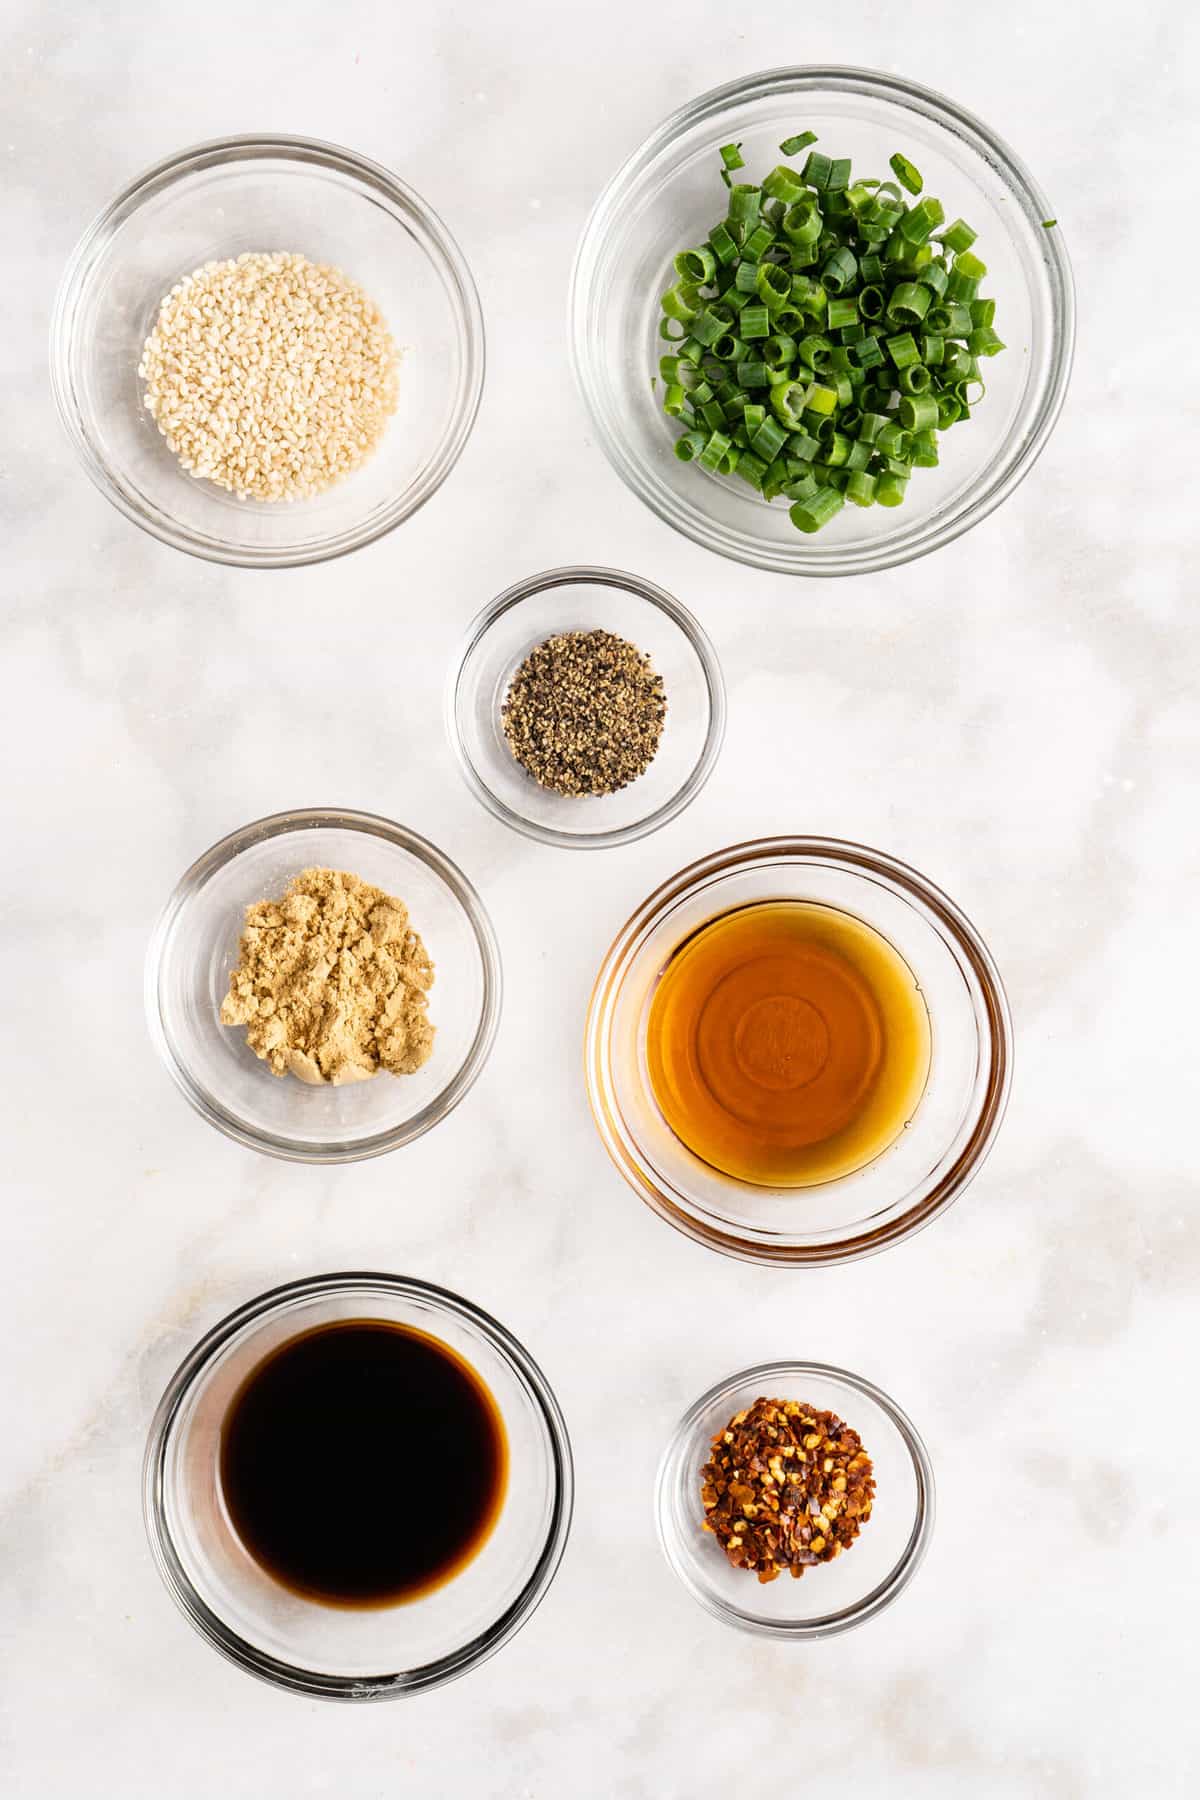 Overhead view of dipping sauce ingredients